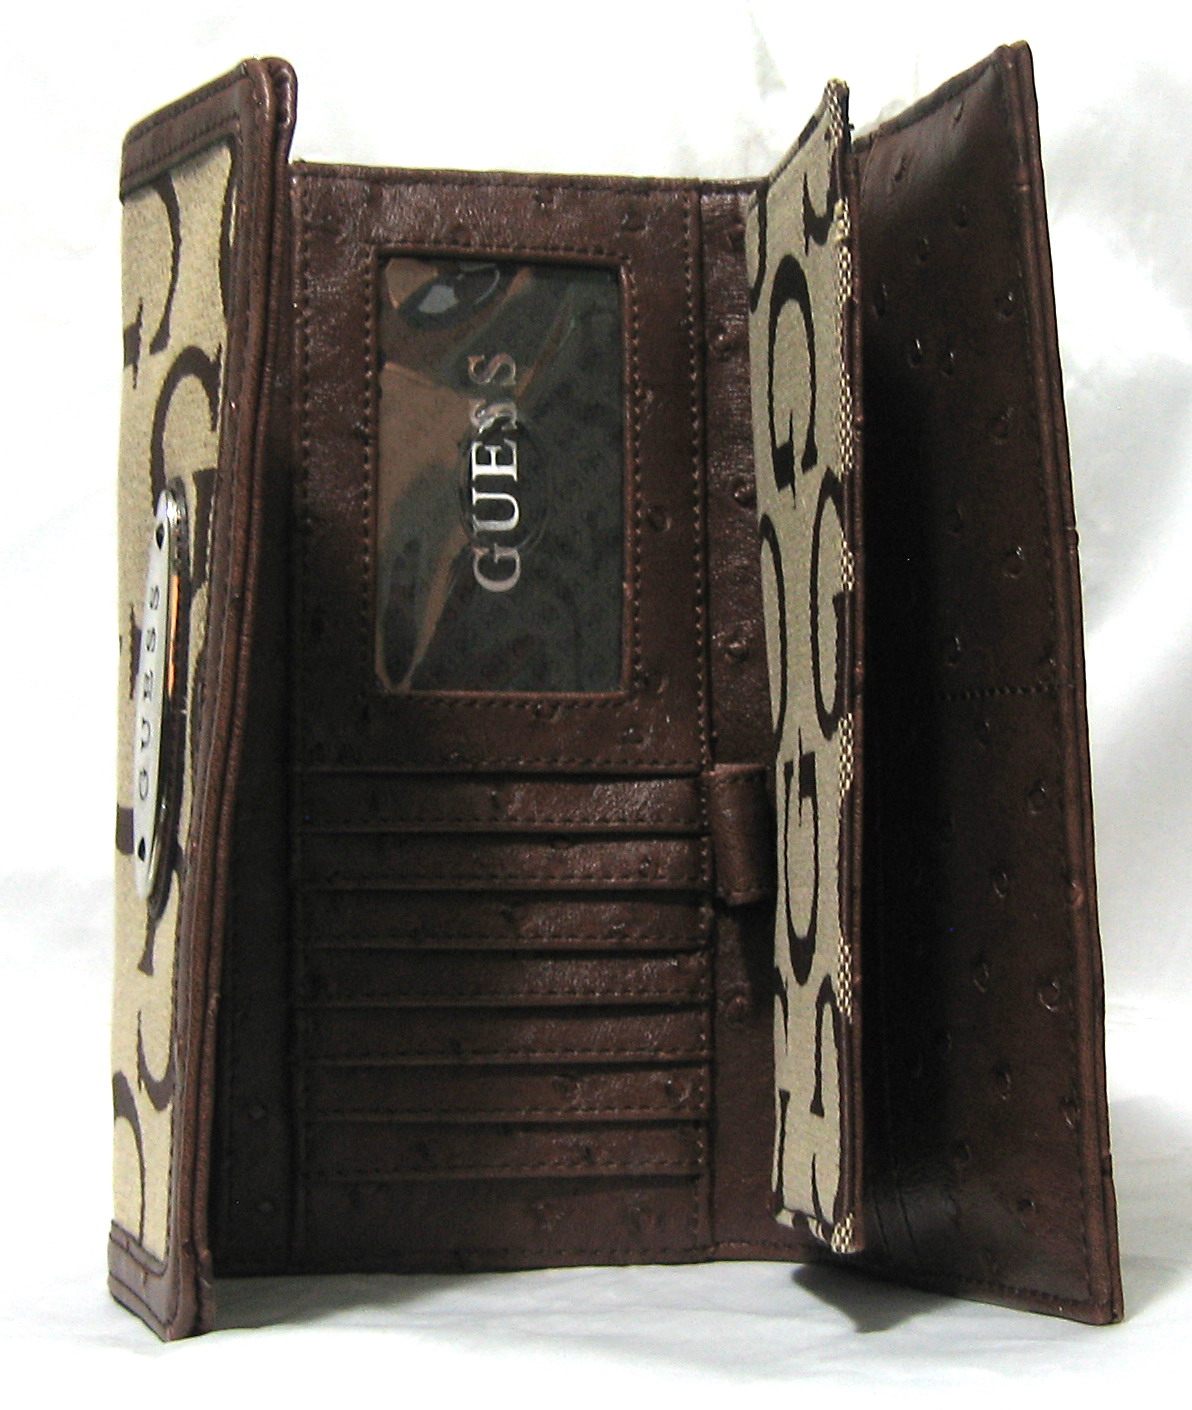 Boutique Malaysia: GUESS HARMONY WOMEN CHECKBOOK WALLET